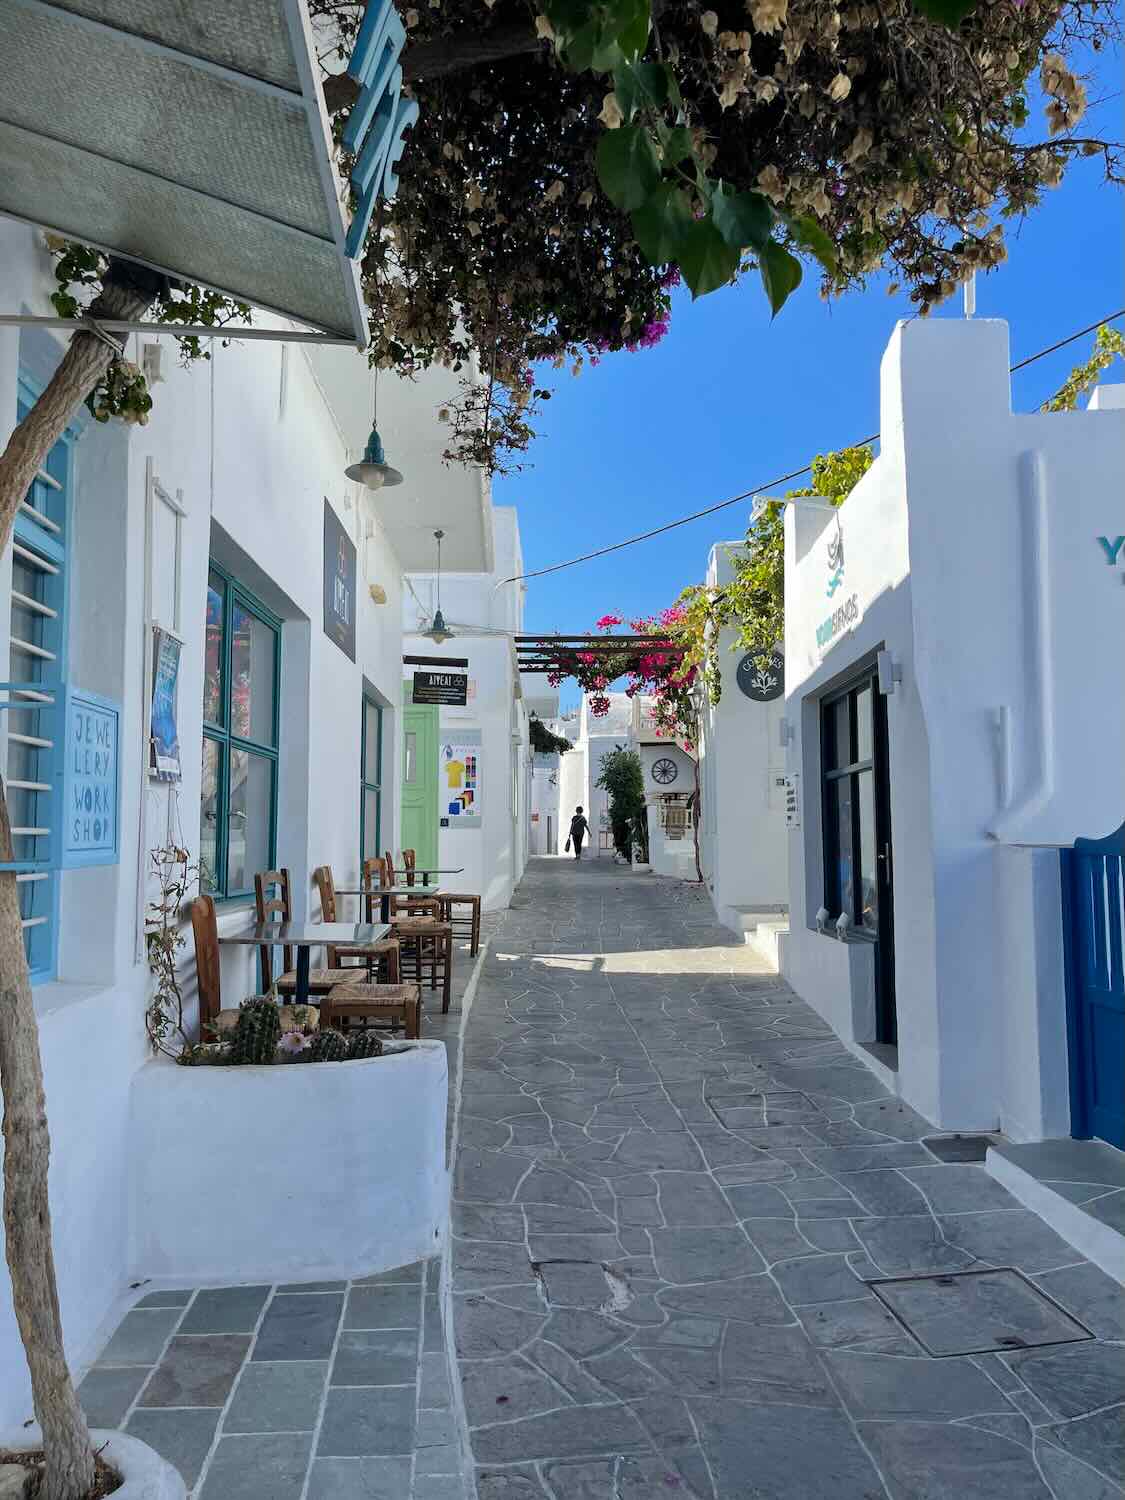 A quaint stone-paved street in Sifnos flanked by white buildings with blue doors and vibrant flowering vines overhead.